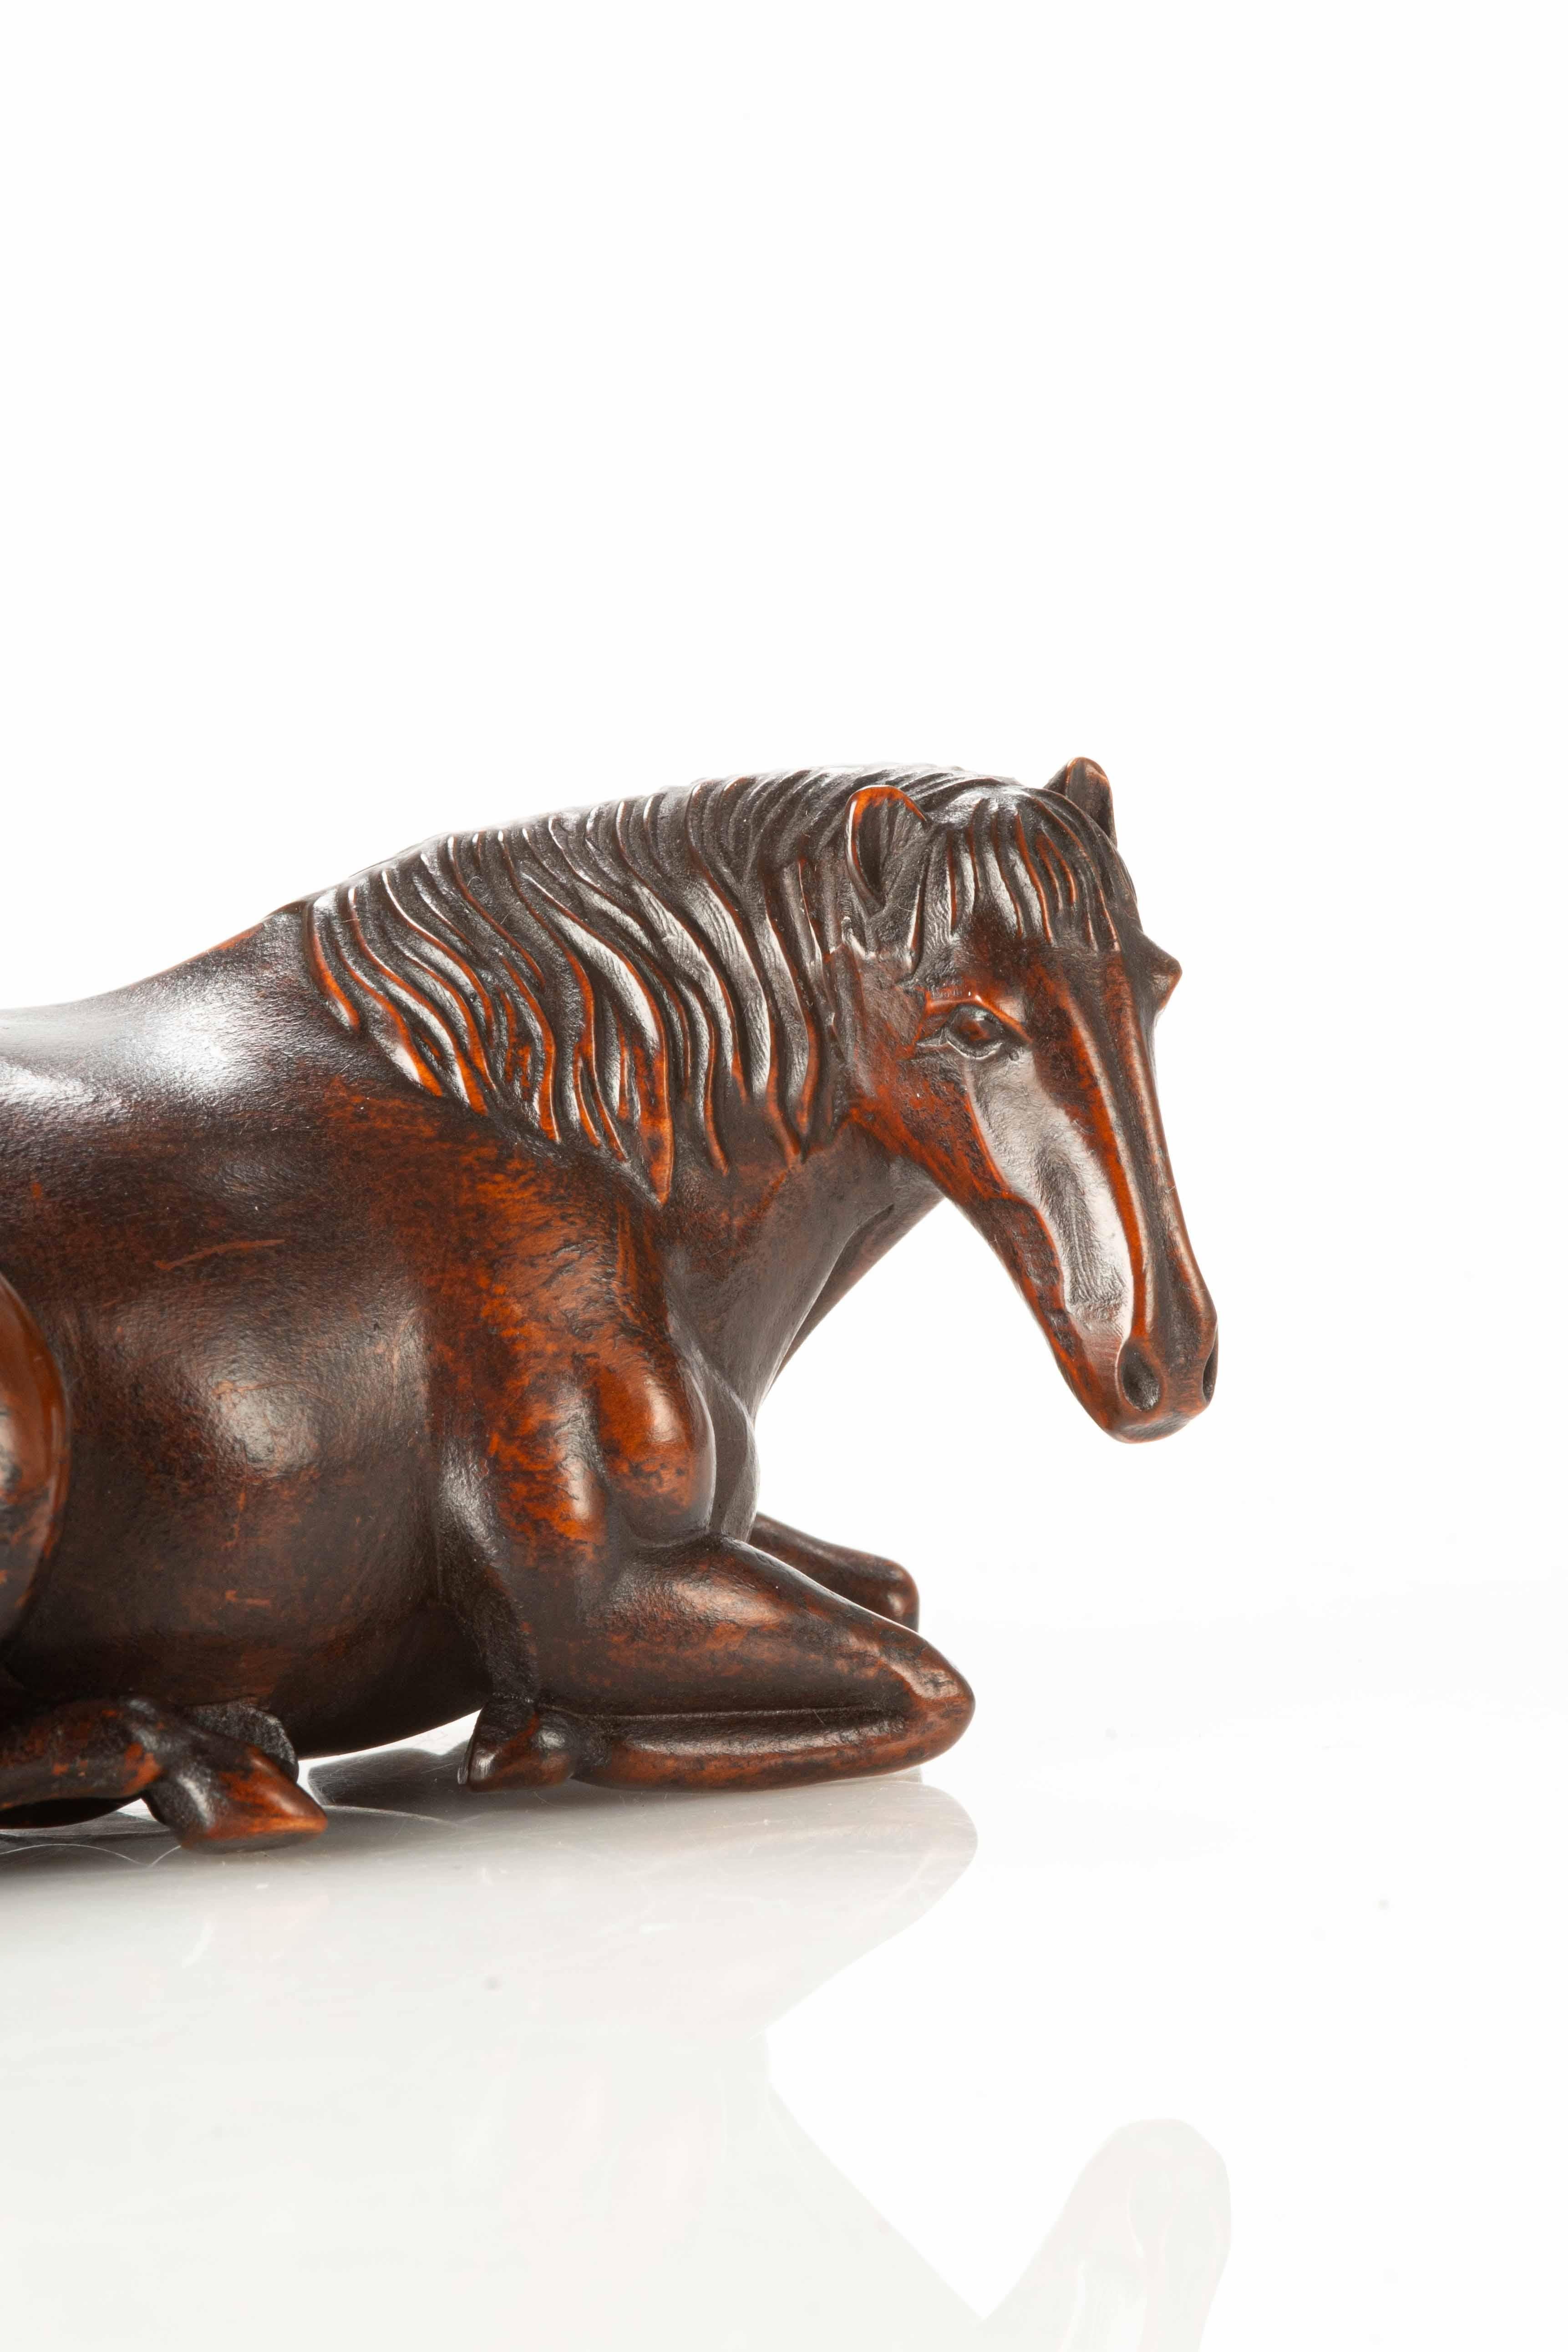 Wooden okimono depicting a lying horse, finely carved down to the smallest details. The muscles, hooves and mane are rendered with care and artistry, capturing the vitality of the horse in a static form.

The excellent patina that envelops the